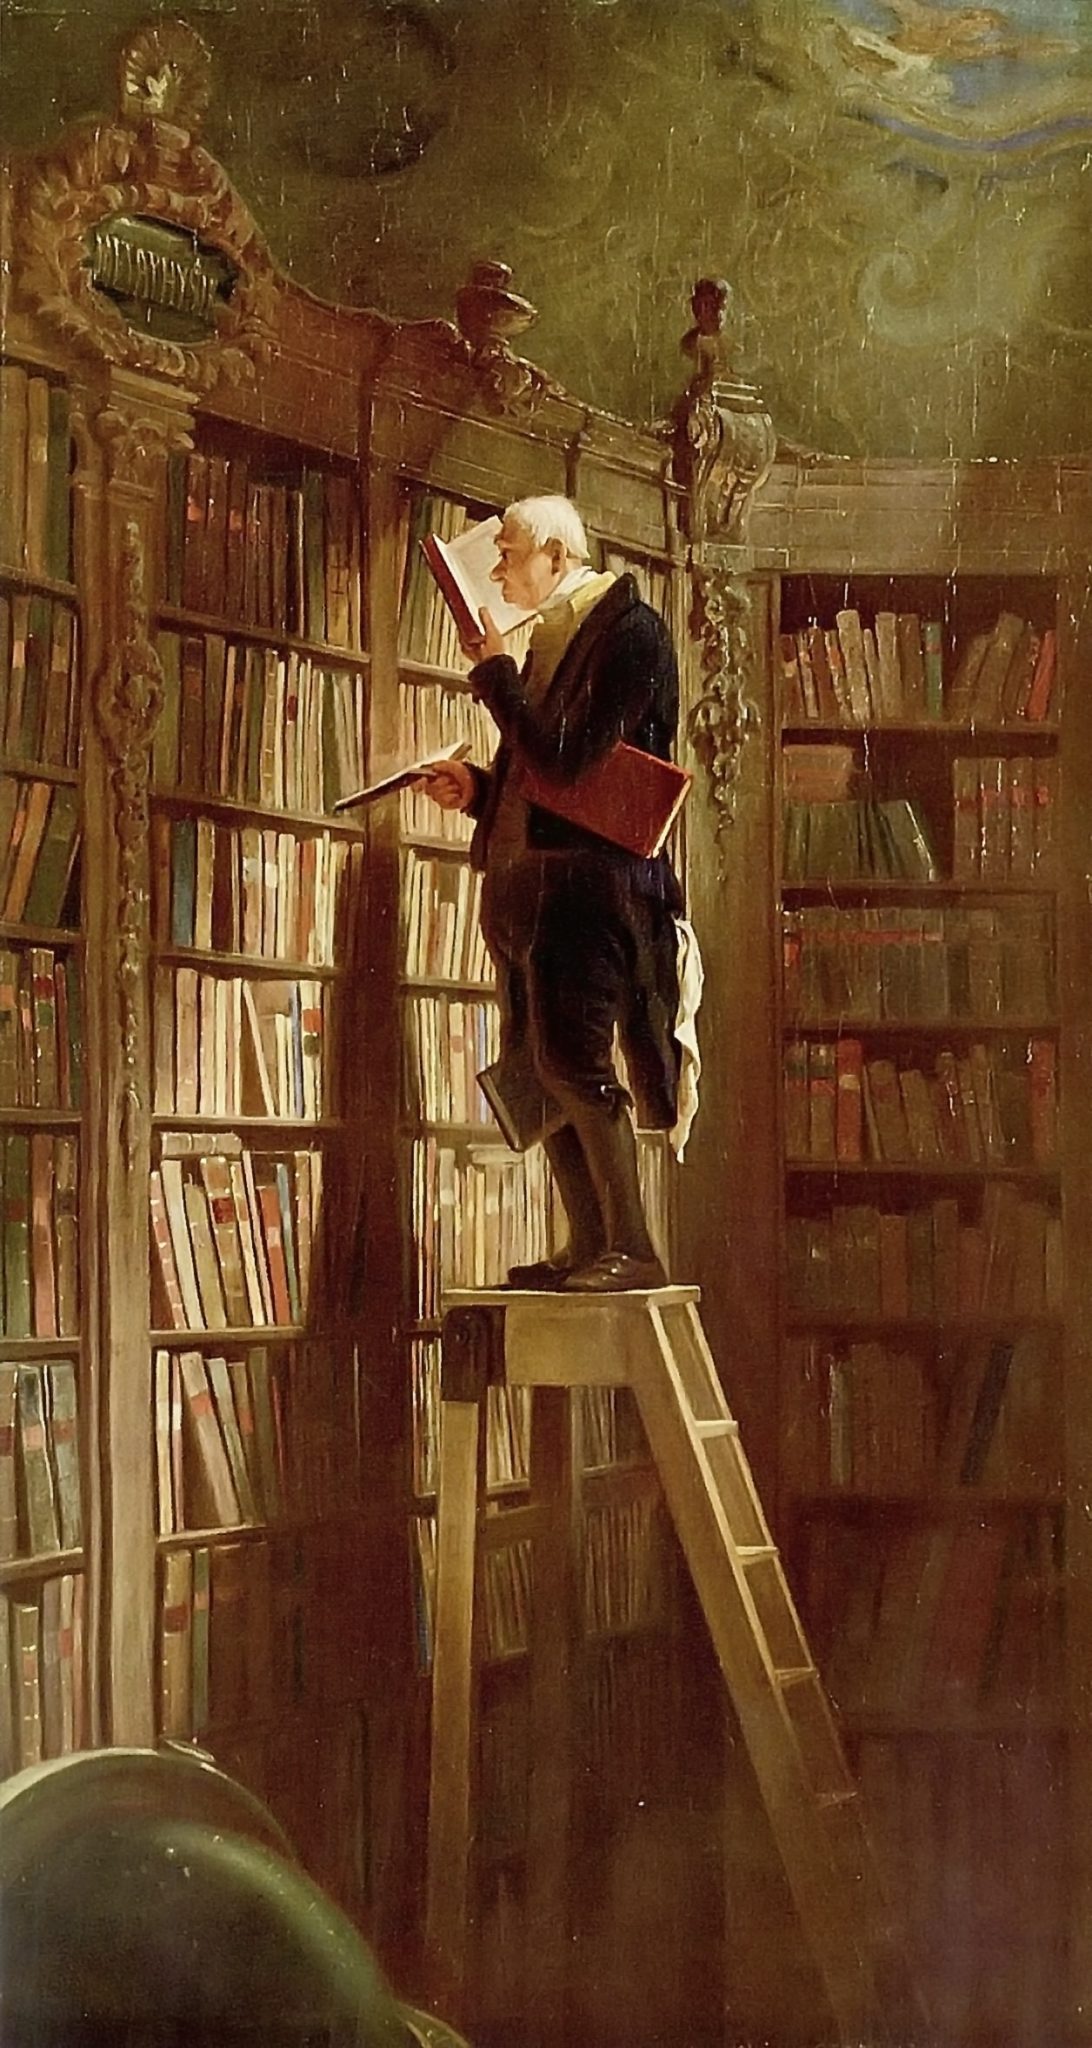 Painting of a man at a tall bookshelf, illustrating a rumor about Charles Valentin Alkan's death